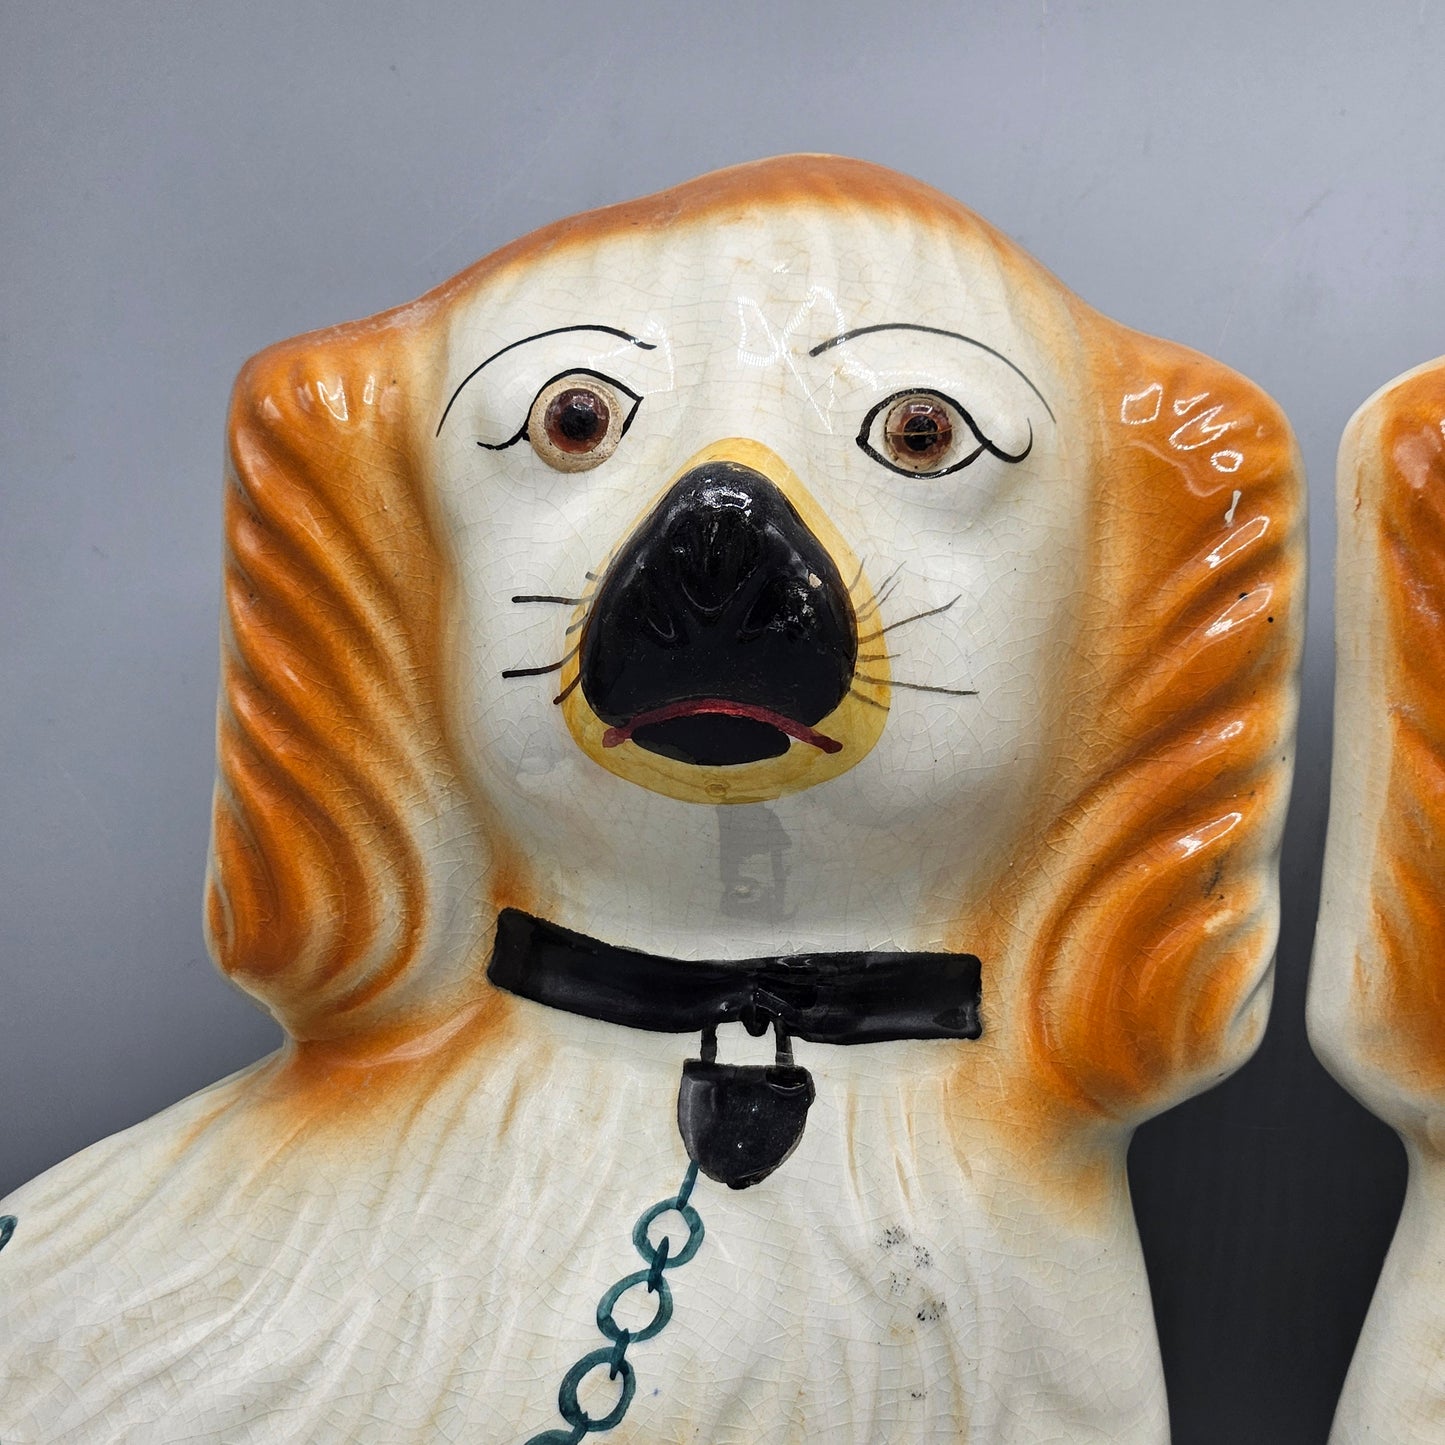 Pair of Staffordshire Dog Figures (one missing an eye) ~ 14"